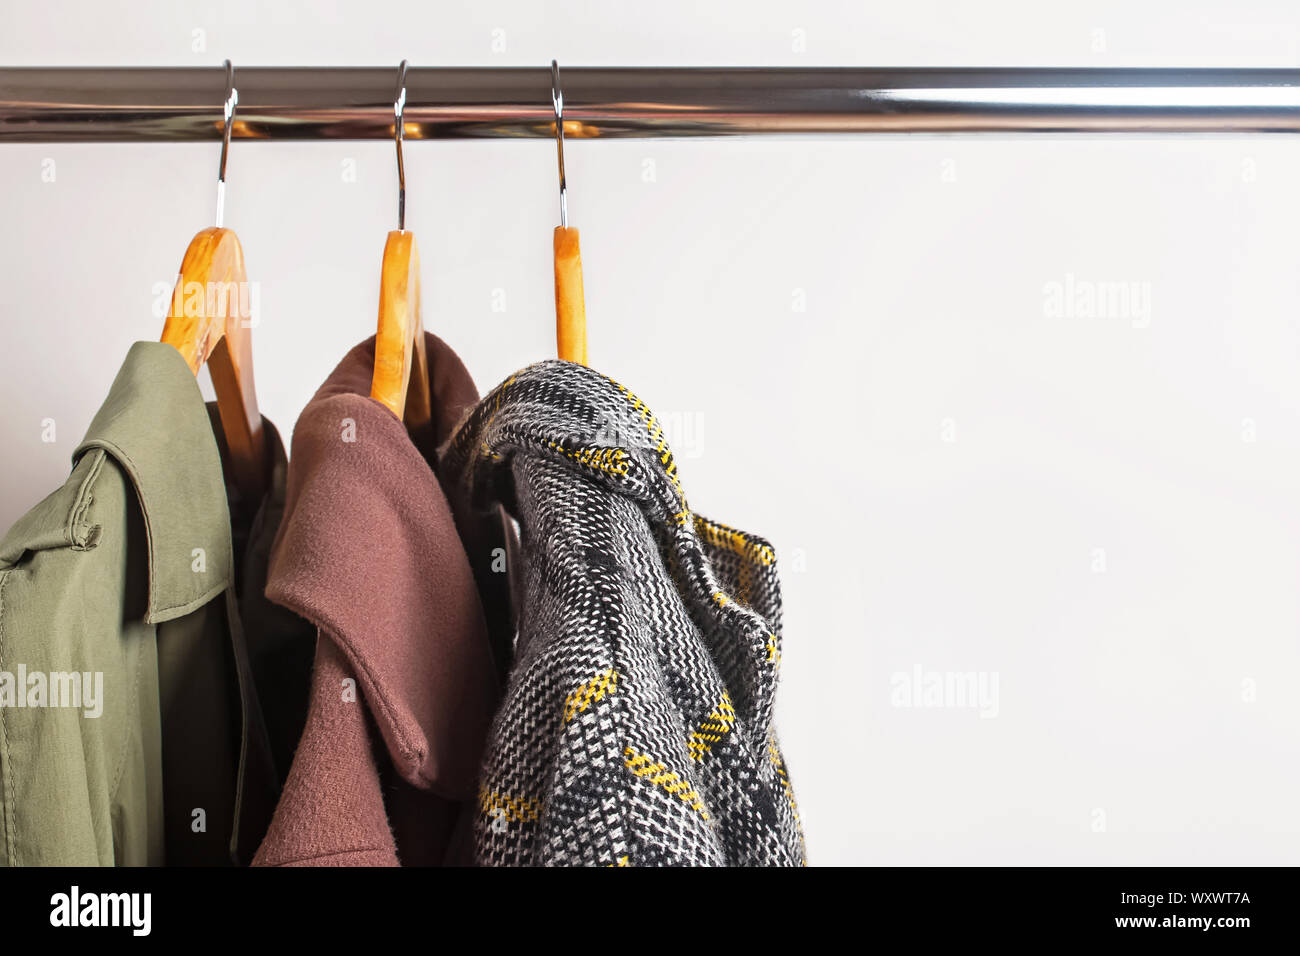 https://c8.alamy.com/comp/WXWT7A/set-of-womans-outwear-for-autumn-and-winter-season-on-hangers-WXWT7A.jpg